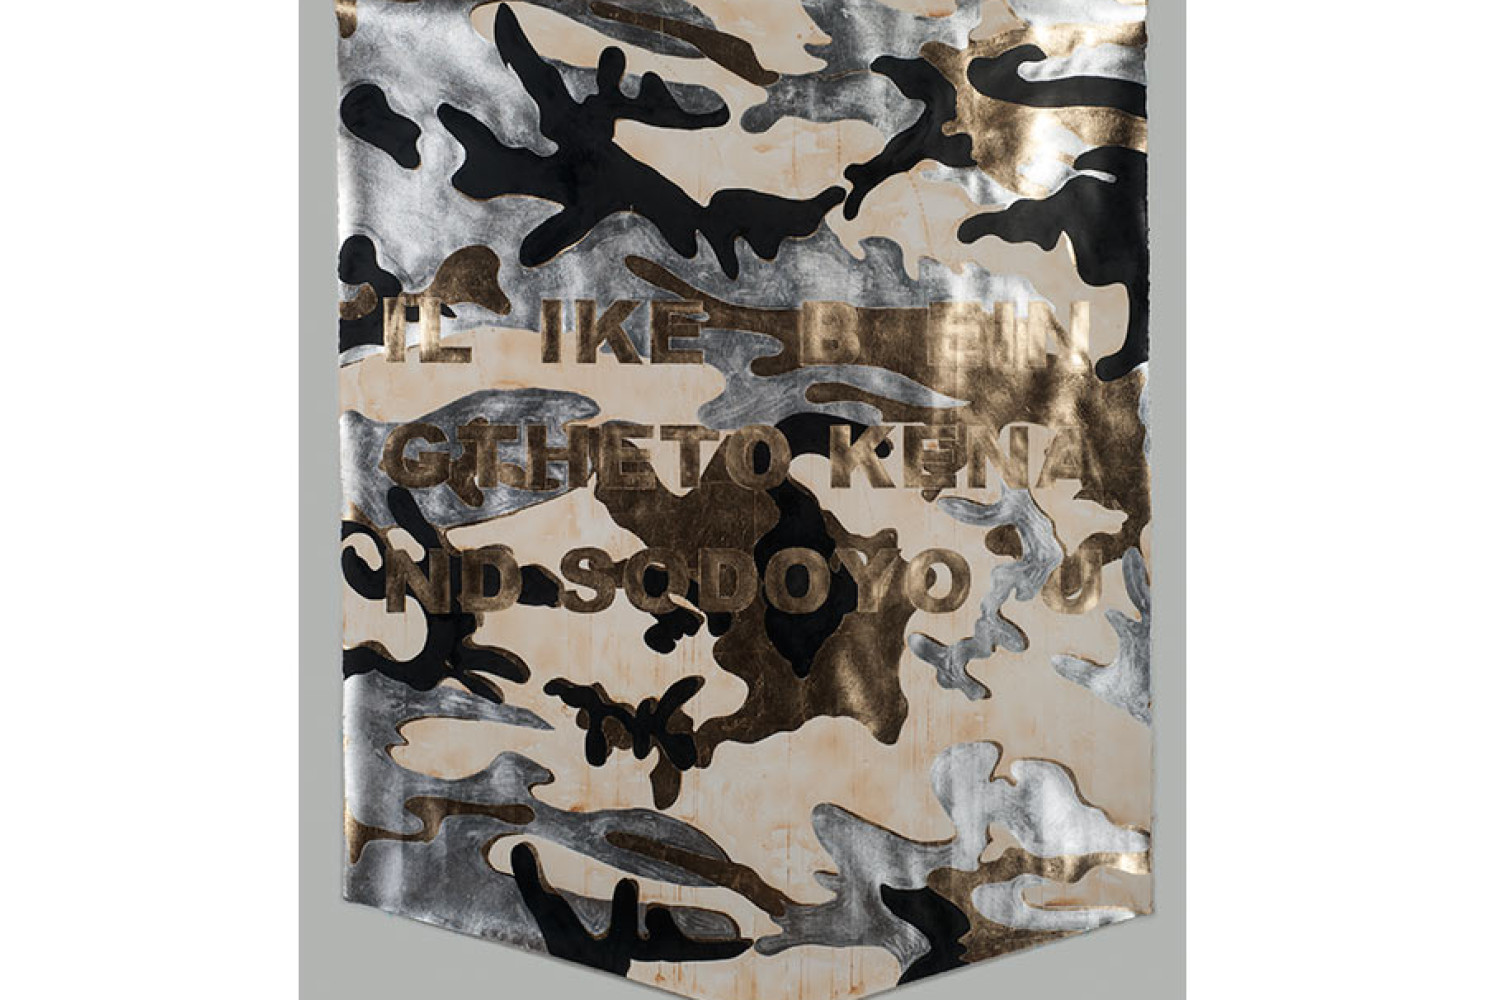 I LIKE BEING THE TOKEN AND SO DO YOU (Camo), 2016. Composition gold and aluminum leaf, India ink, and singed paper; 52 x 52 inches. Courtesy of the artist.